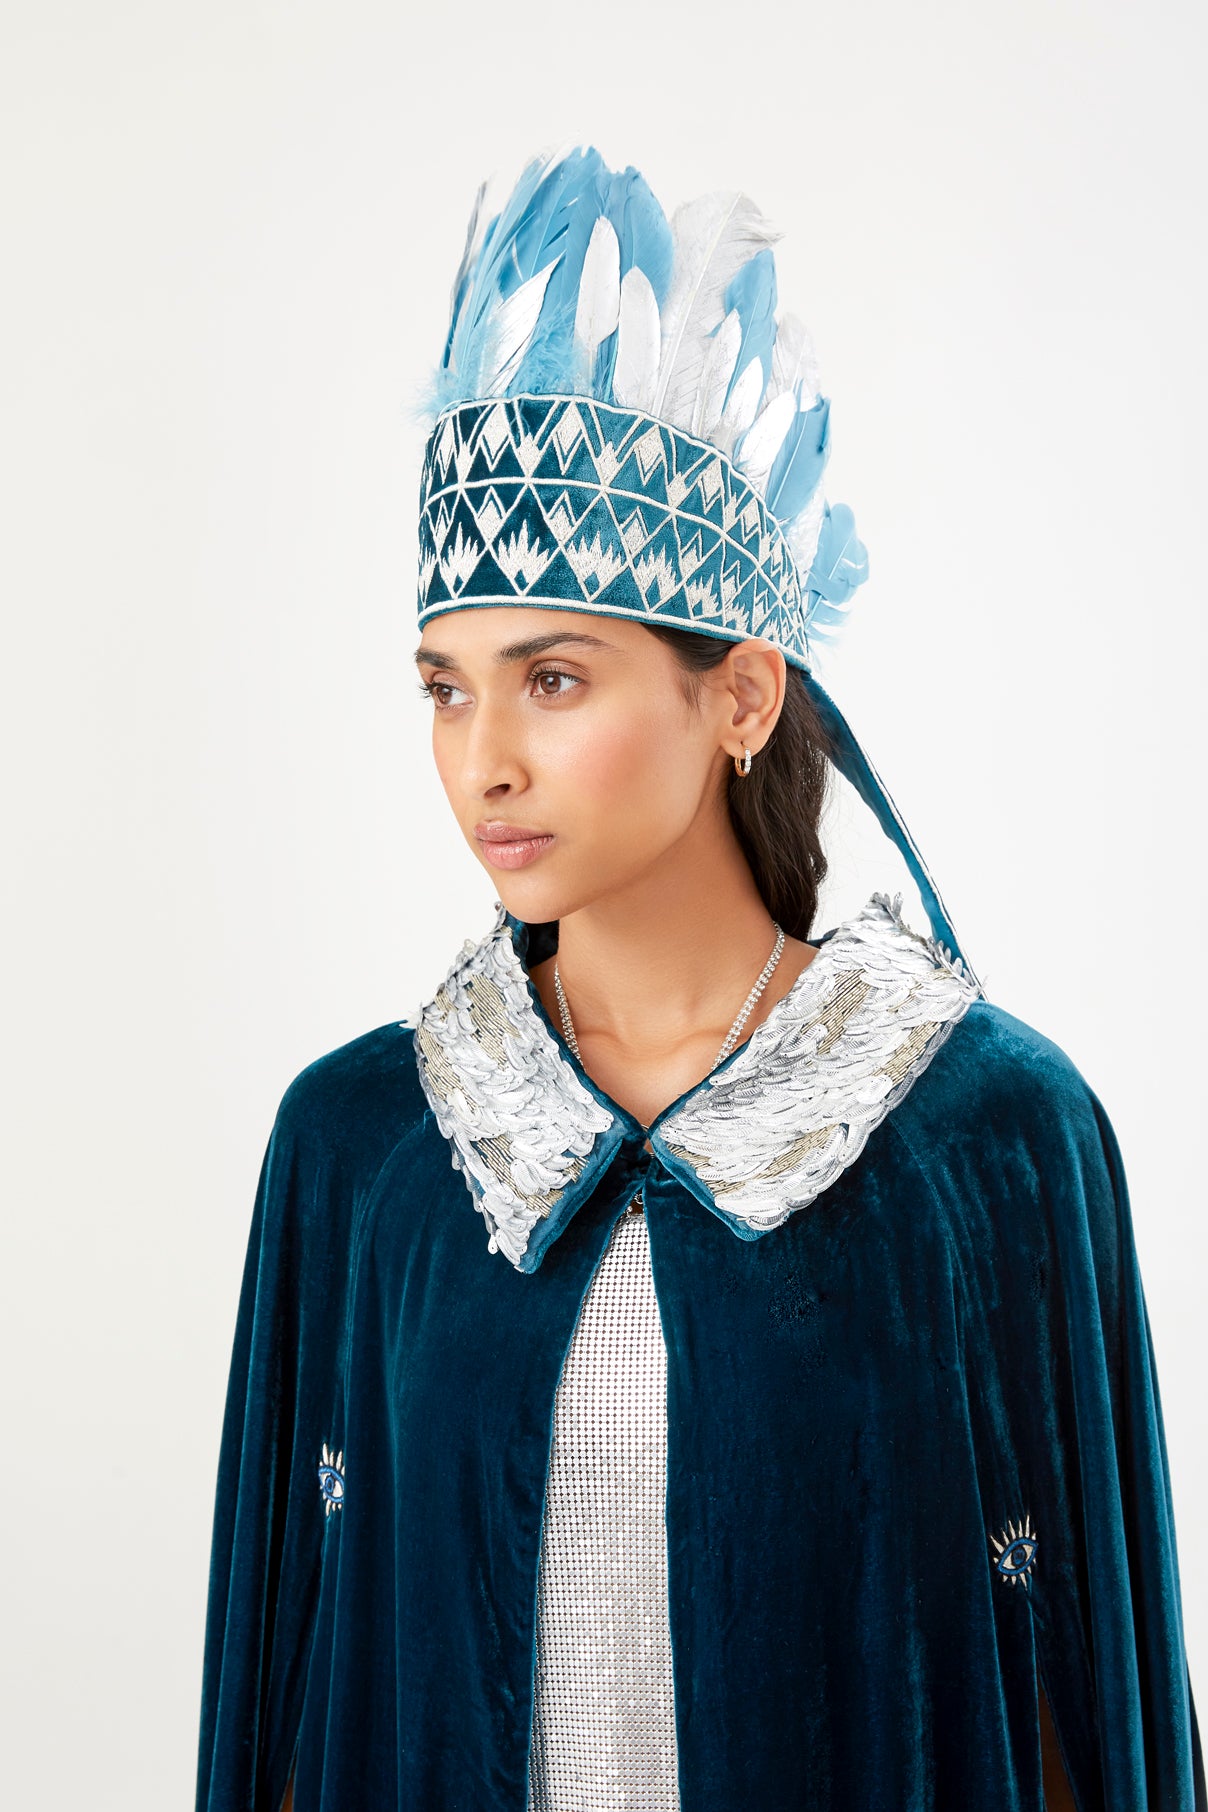 The Silver Feather Headdress